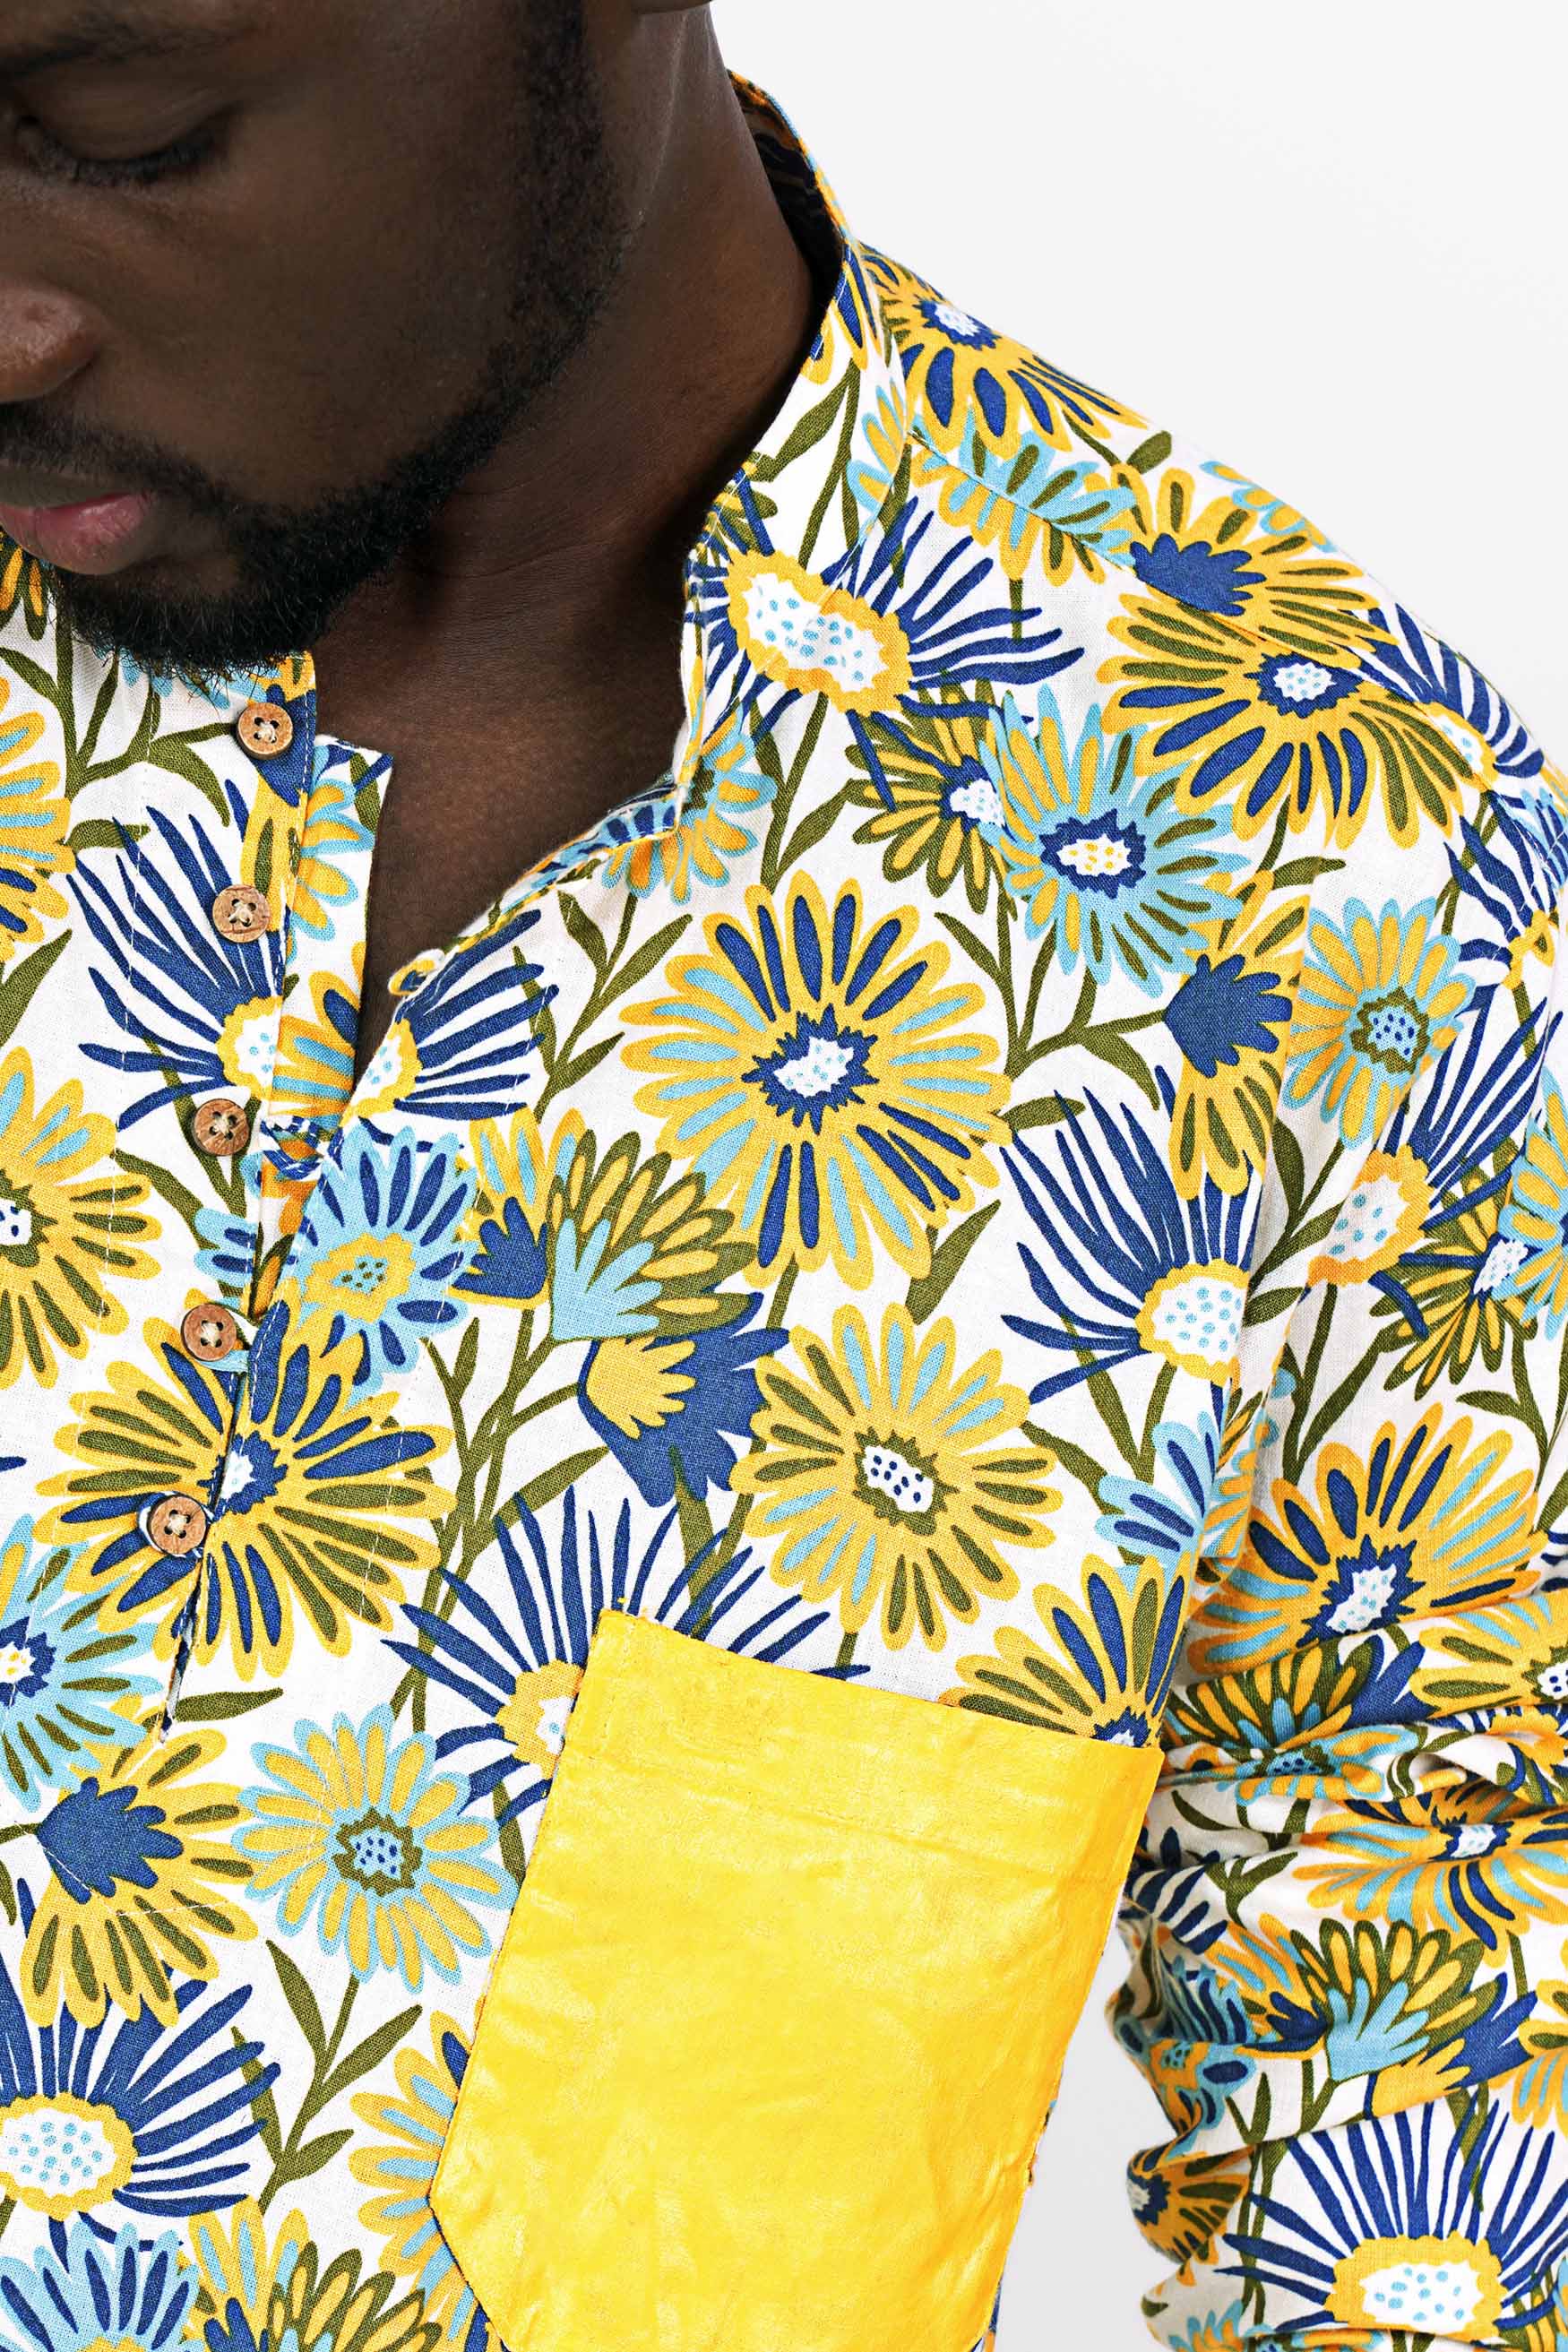 Sweetcorn Yellow with Bright White Multicolour Floral Printed Hand Painted Royal Oxford Kurta Designer Shirt 6235-KS-ART-38, 6235-KS-ART-H-38, 6235-KS-ART-39, 6235-KS-ART-H-39, 6235-KS-ART-40, 6235-KS-ART-H-40, 6235-KS-ART-42, 6235-KS-ART-H-42, 6235-KS-ART-44, 6235-KS-ART-H-44, 6235-KS-ART-46, 6235-KS-ART-H-46, 6235-KS-ART-48, 6235-KS-ART-H-48, 6235-KS-ART-50, 6235-KS-ART-H-50, 6235-KS-ART-52, 6235-KS-ART-H-52